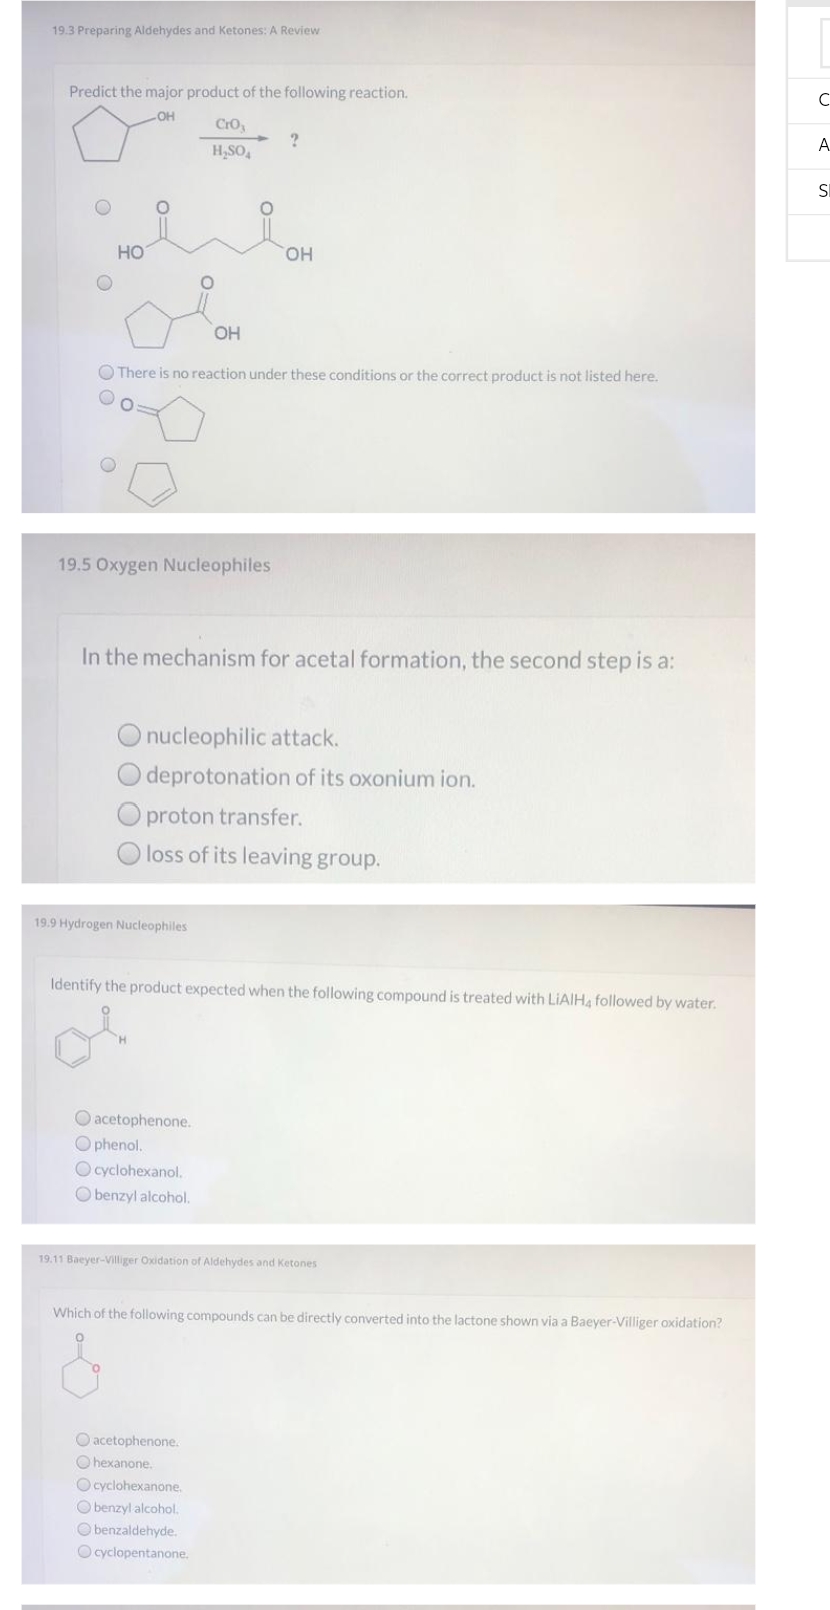 19.3 Preparing Aldehydes and Ketones: A Review
Predict the major product of the following reaction.
OH
O
O
HO
20
OH
There is no reaction under these conditions or the correct product is not listed here.
19.5 Oxygen Nucleophiles
CrO₂
H₂SO4
?
In the mechanism for acetal formation, the second step is a:
19.9 Hydrogen Nucleophiles
OH
O nucleophilic attack.
deprotonation of its oxonium ion.
proton transfer.
loss of its leaving group.
O acetophenone.
Ophenol.
O cyclohexanol.
Obenzyl alcohol.
Identify the product expected when the following compound is treated with LiAlH4 followed by water.
O acetophenone.
Ohexanone.
O cyclohexanone.
O benzyl alcohol.
Obenzaldehyde.
Ocyclopentanone.
19.11 Baeyer-Villiger Oxidation of Aldehydes and Ketones
Which of the following compounds can be directly converted into the lactone shown via a Baeyer-Villiger oxidation?
с
A
SI